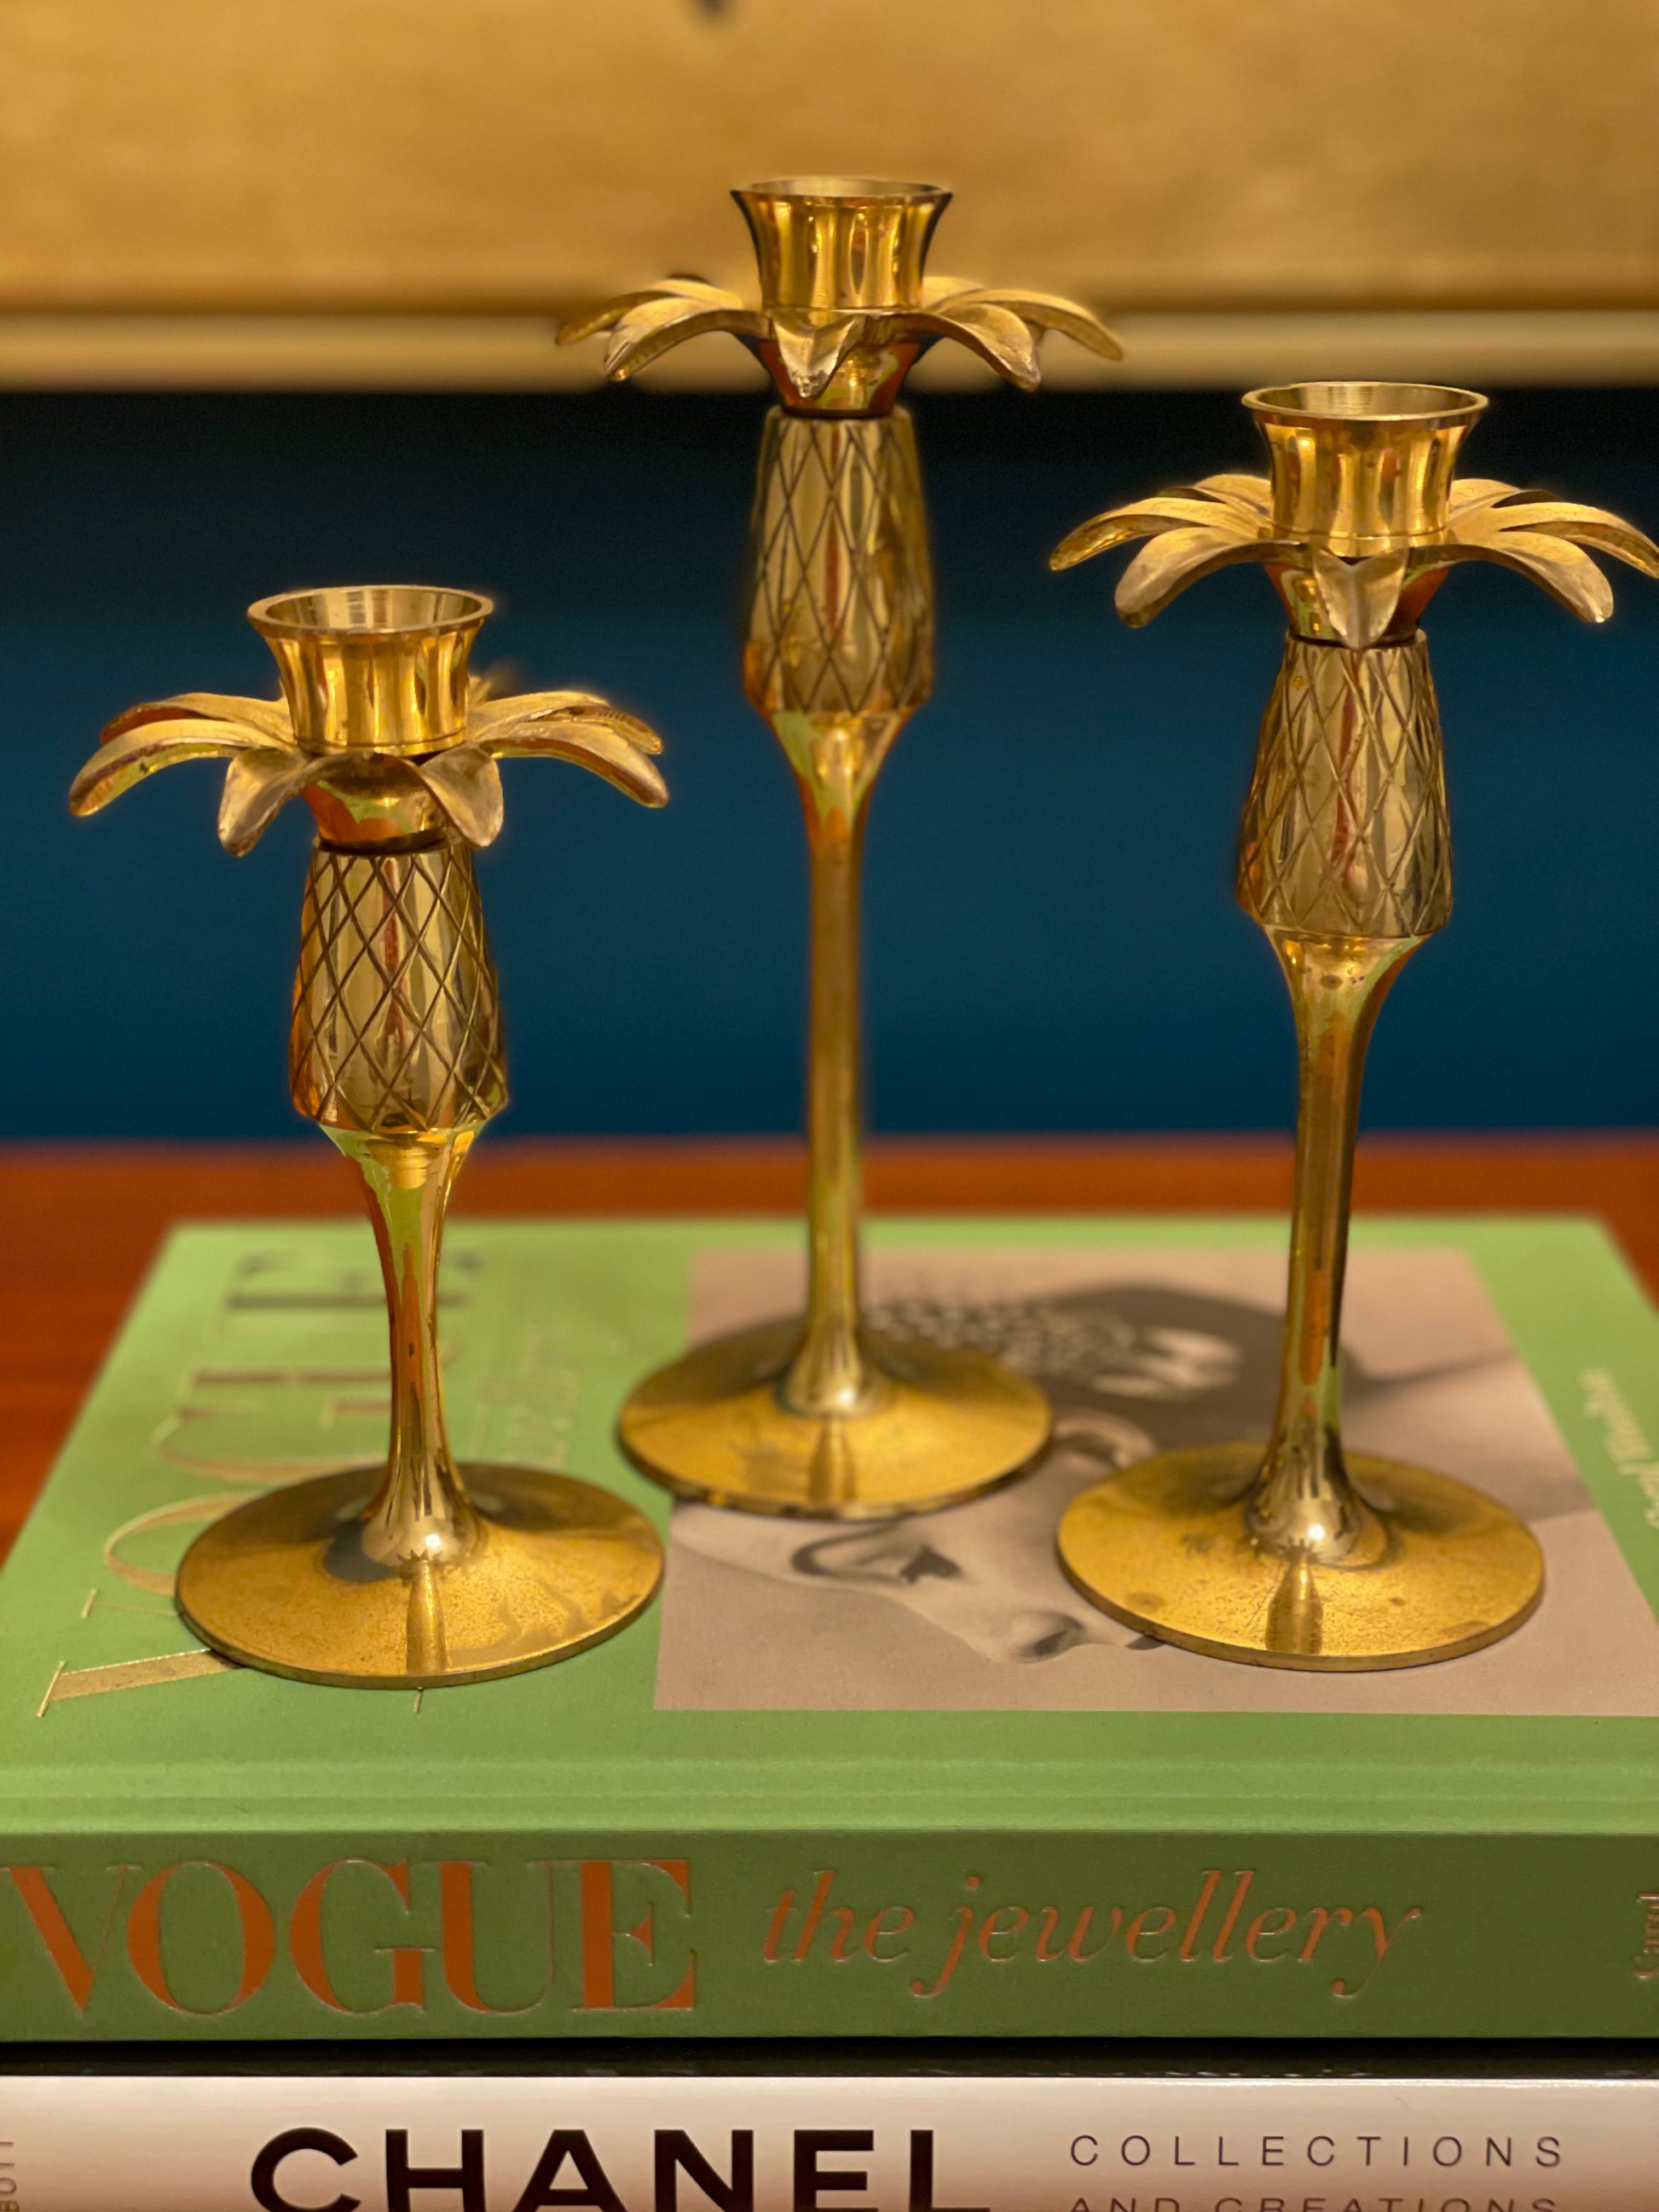 Vintage Brass Bow Candlesticks Brass Candle Holders Graduating